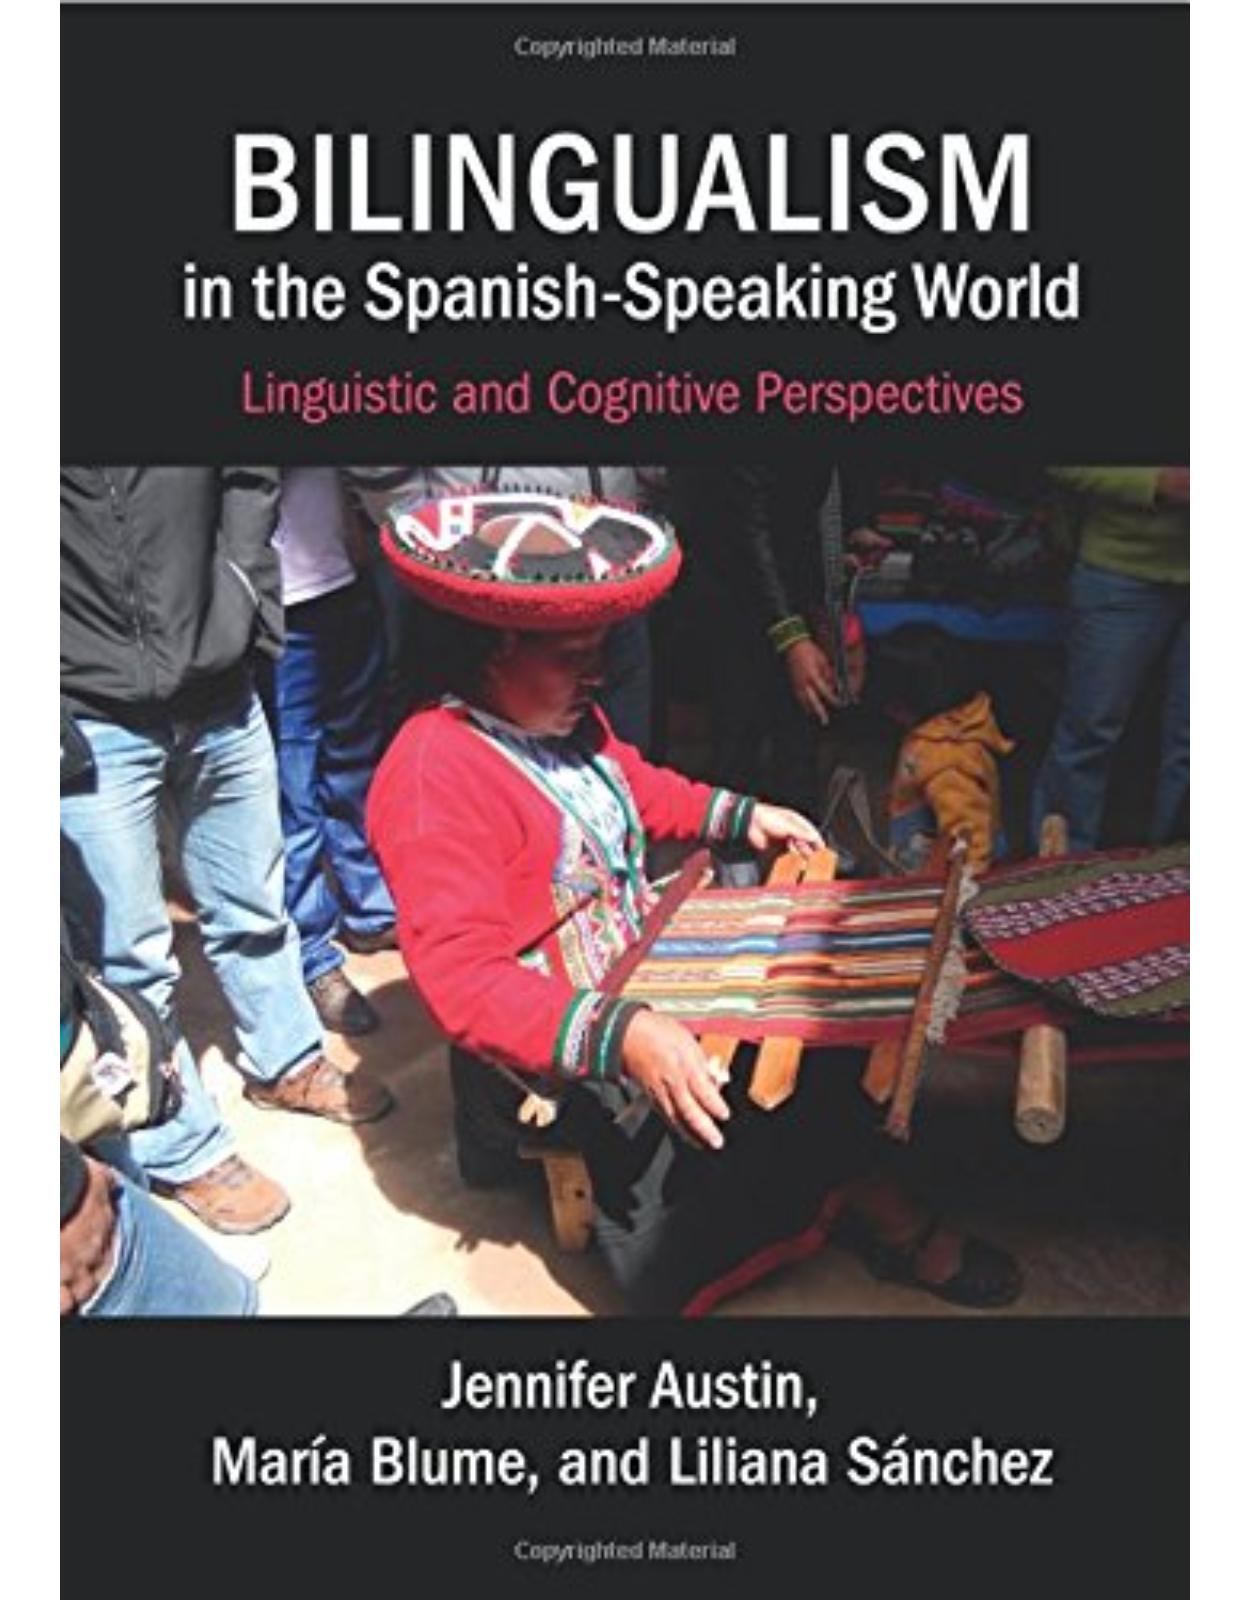 Bilingualism in the Spanish-Speaking World: Linguistic and Cognitive Perspectives